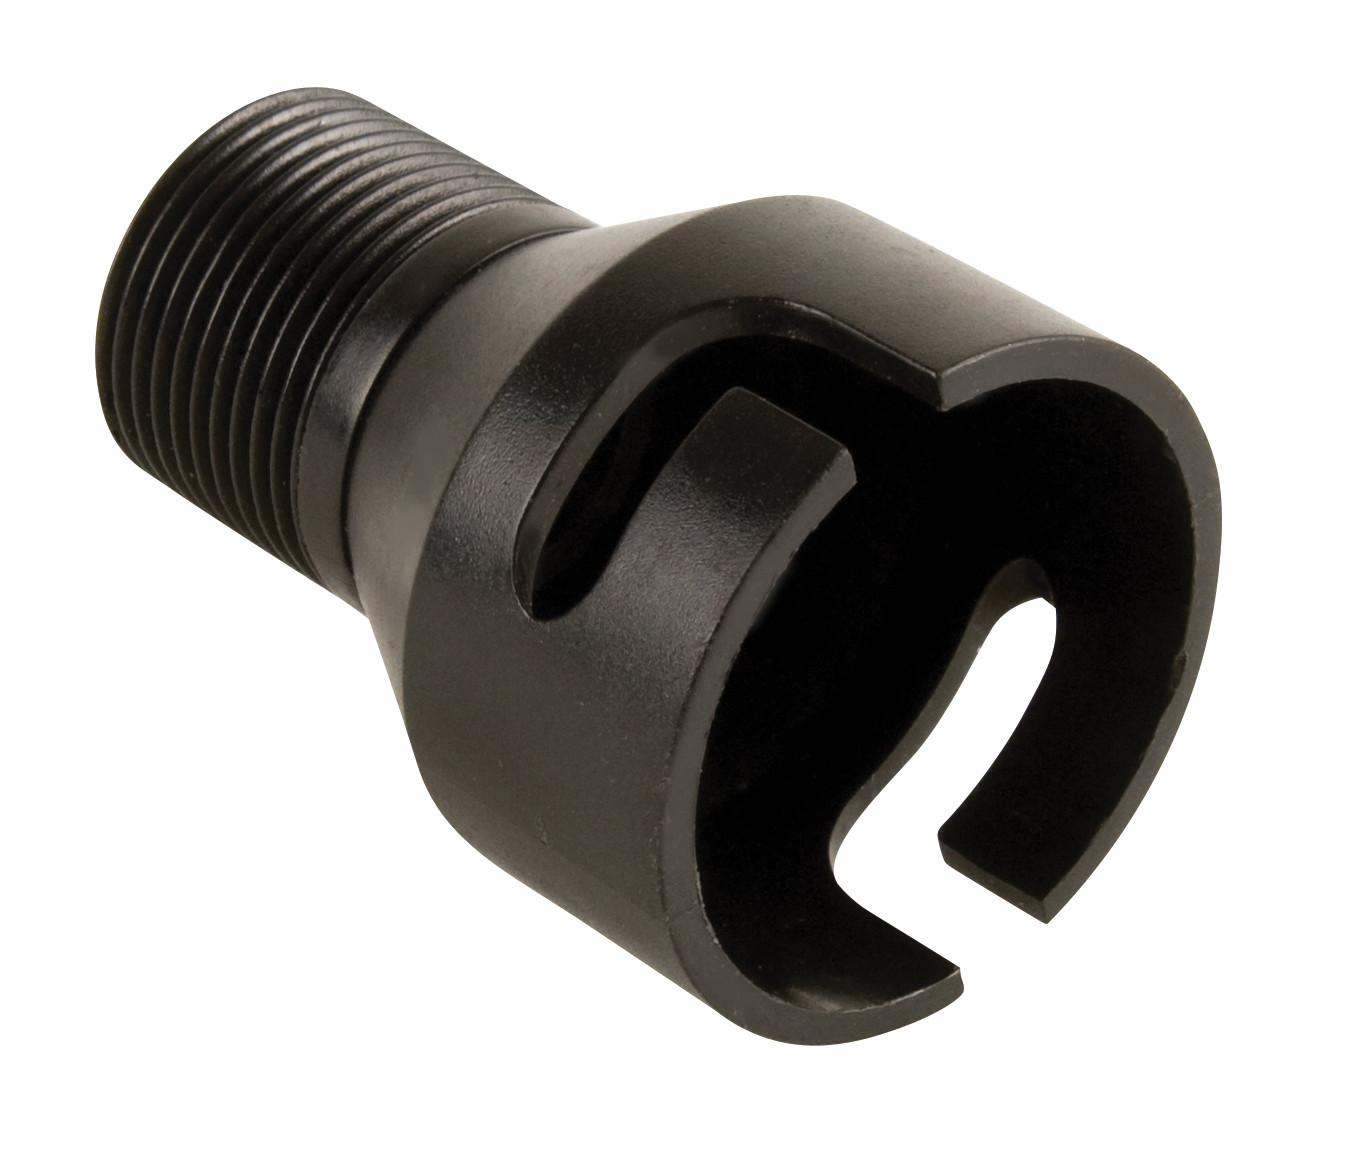 LINK FEMALE  TO 3/4" GHT ADAPTER   1PK